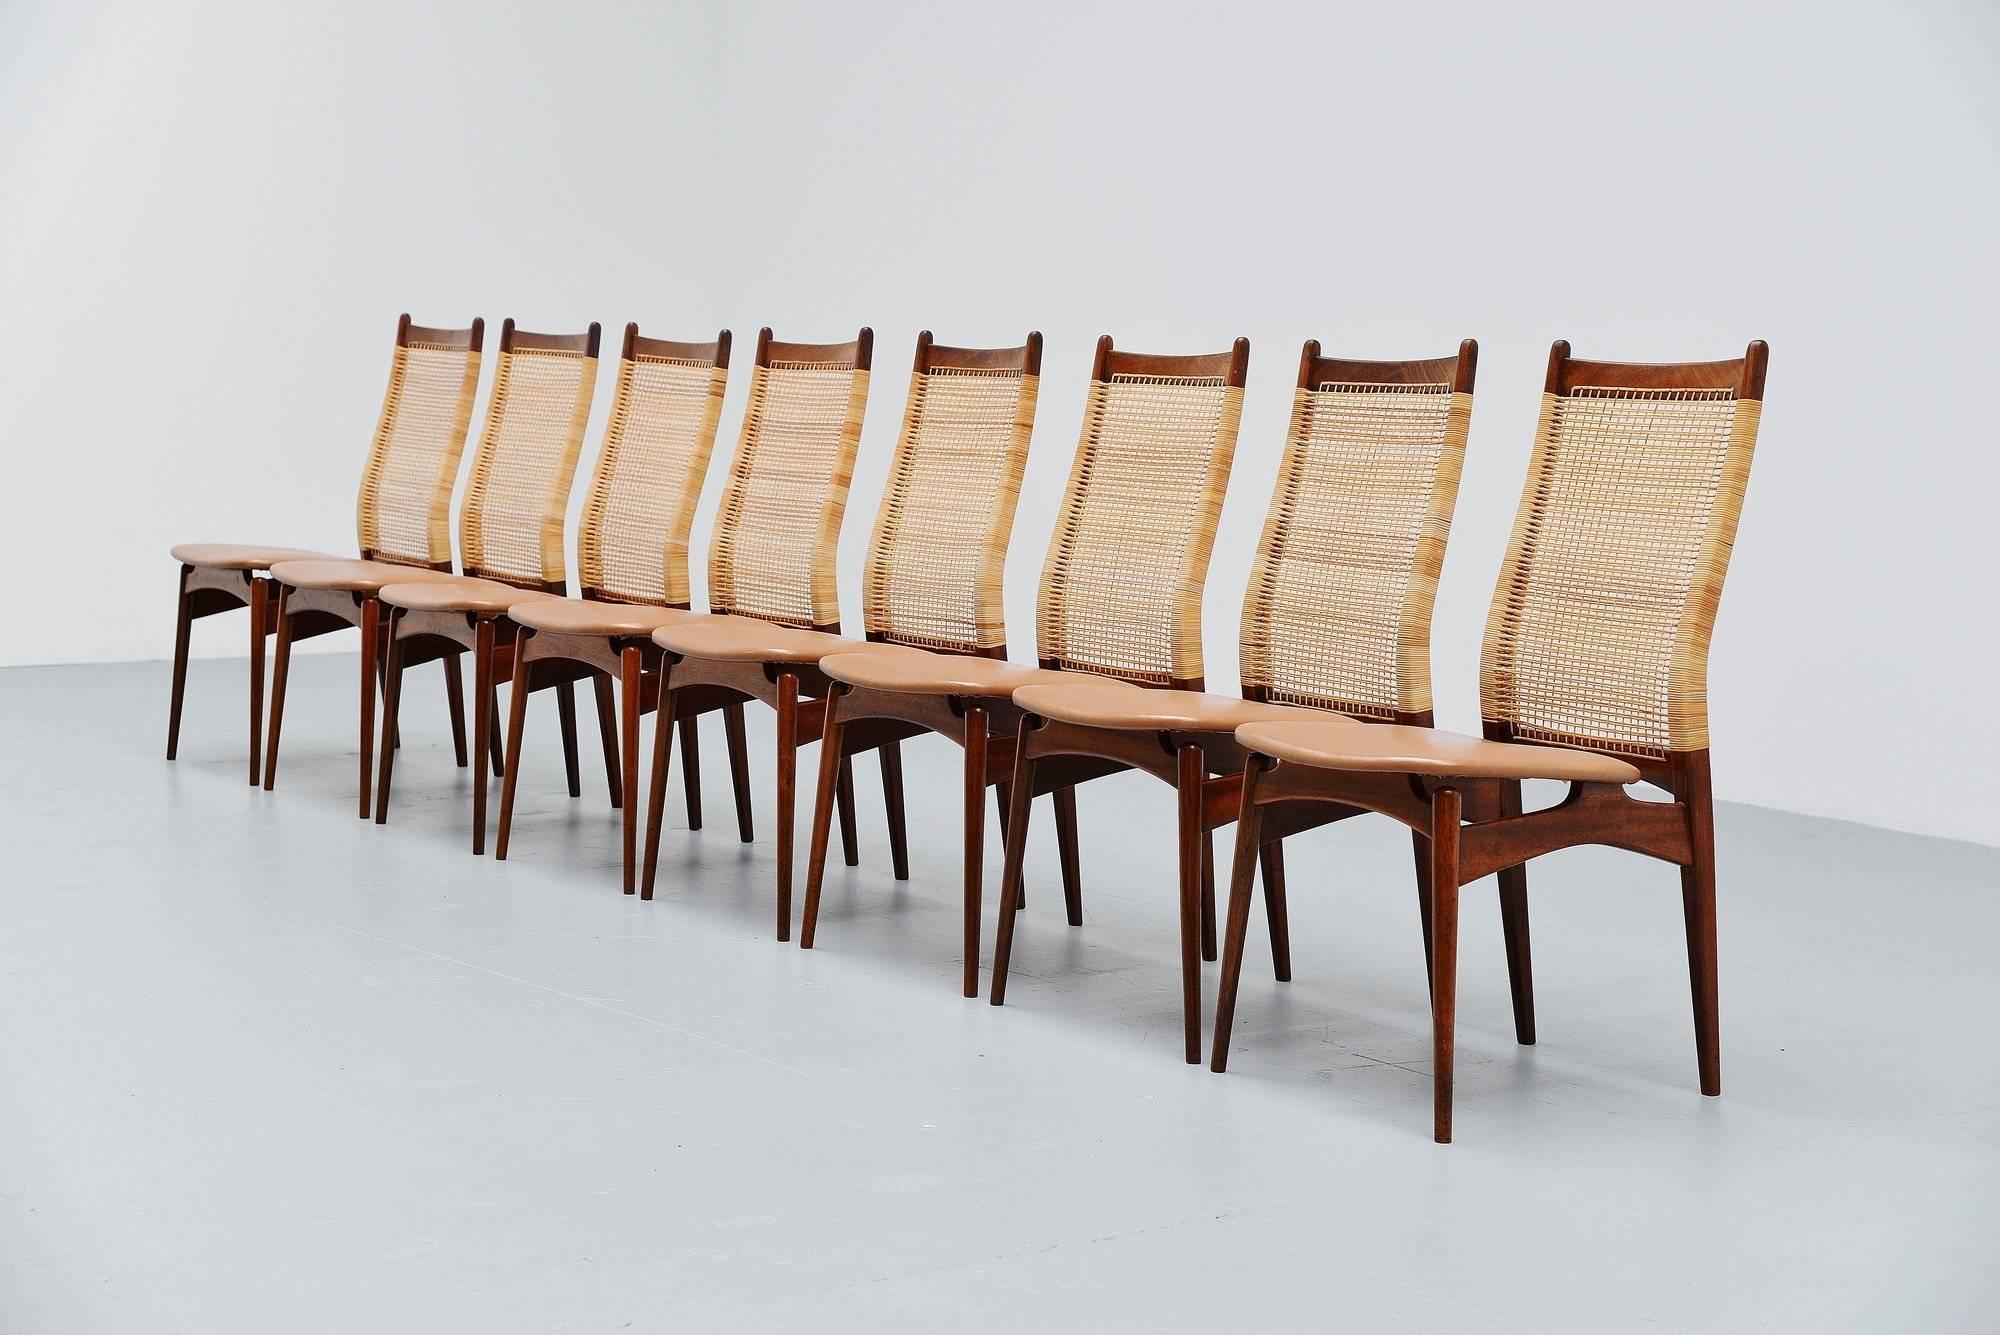 Nicely shaped dining chairs designed by Jos De Mey and manufactured by Van Den Berghe Pauvers, Belgium, 1957. The chairs are made of solid teakwood, have a cane back and light brown faux leather upholstered seats. The chairs are in good original